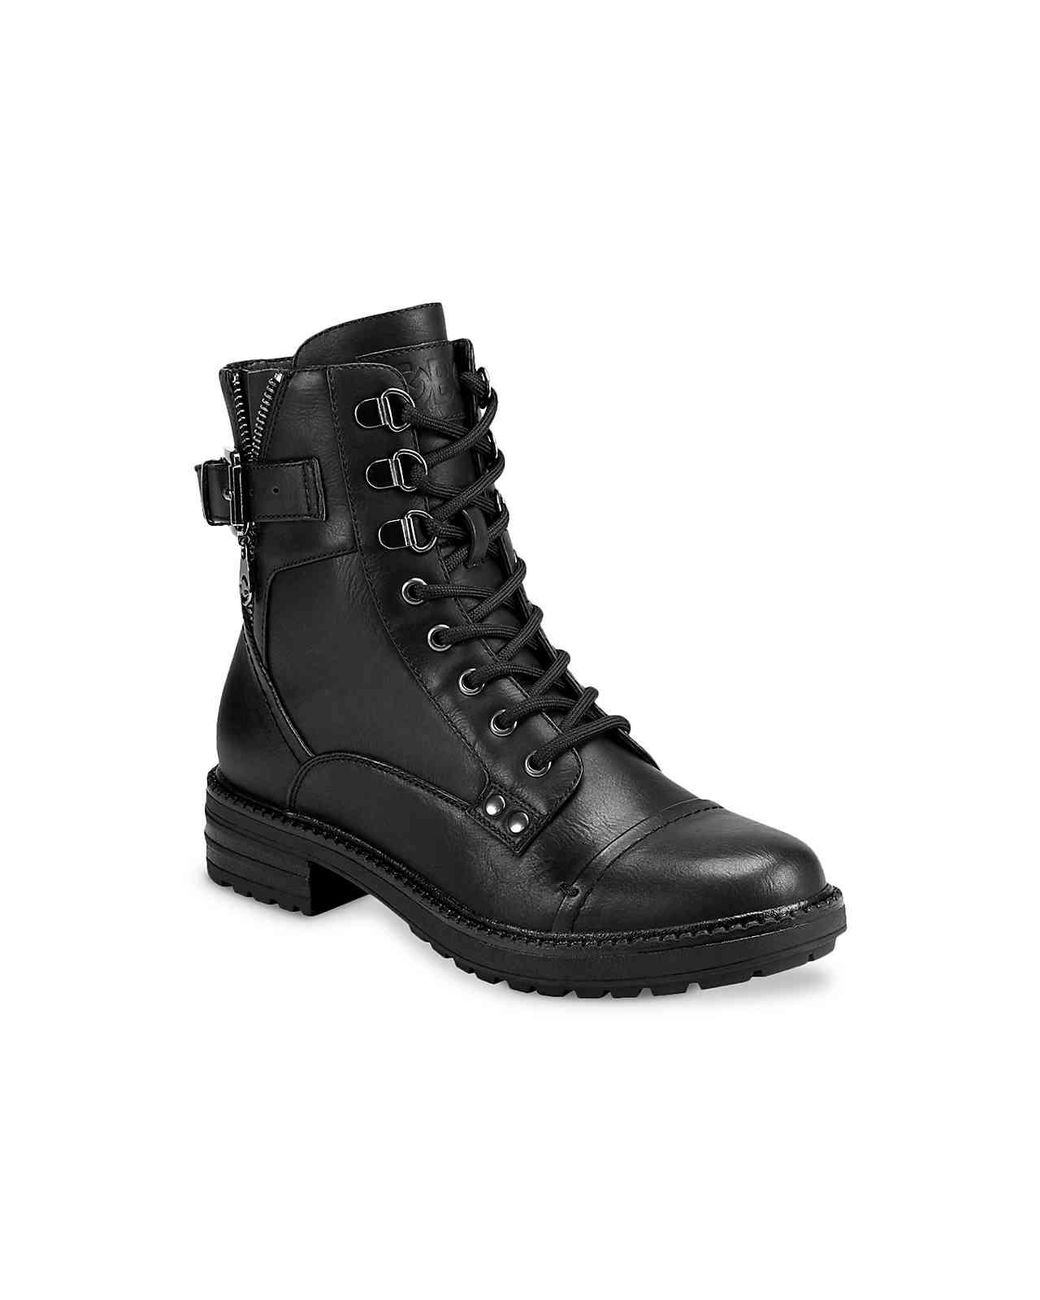 G by Guess Gessy Combat Boot in Black | Lyst